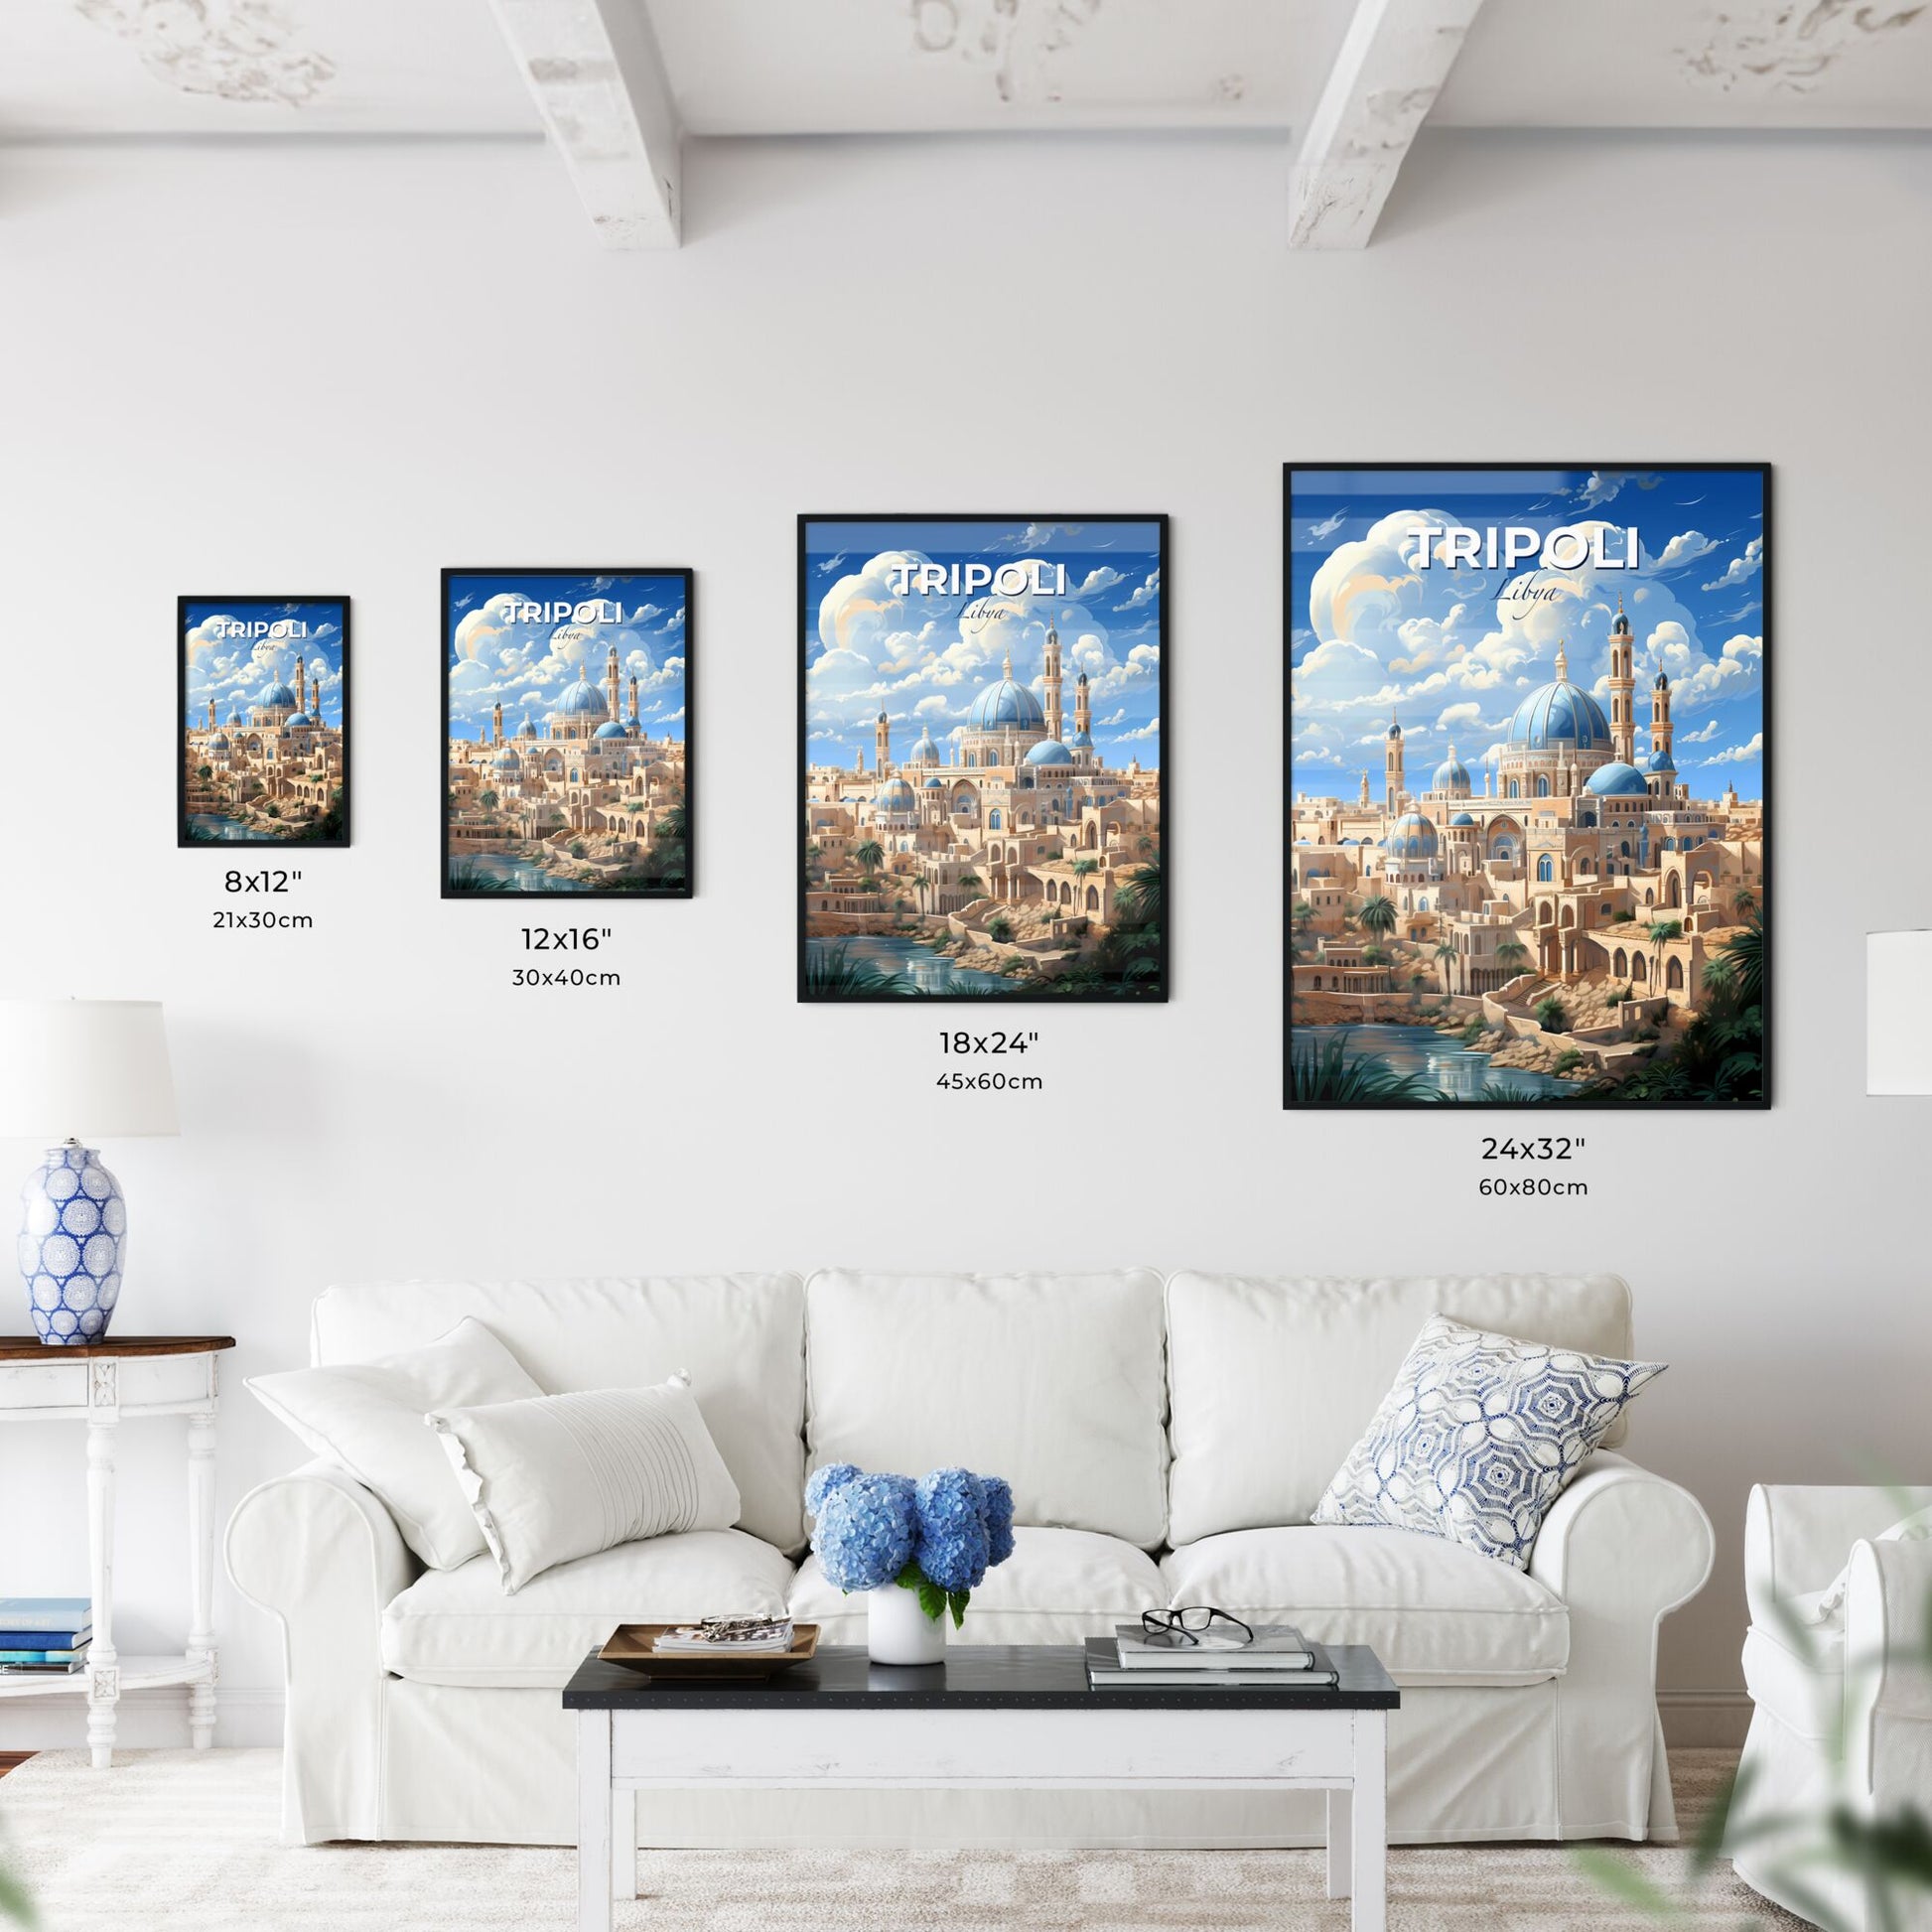 Vibrant Tripoli Libya Skyline Painting with Blue Domes and Roof Default Title